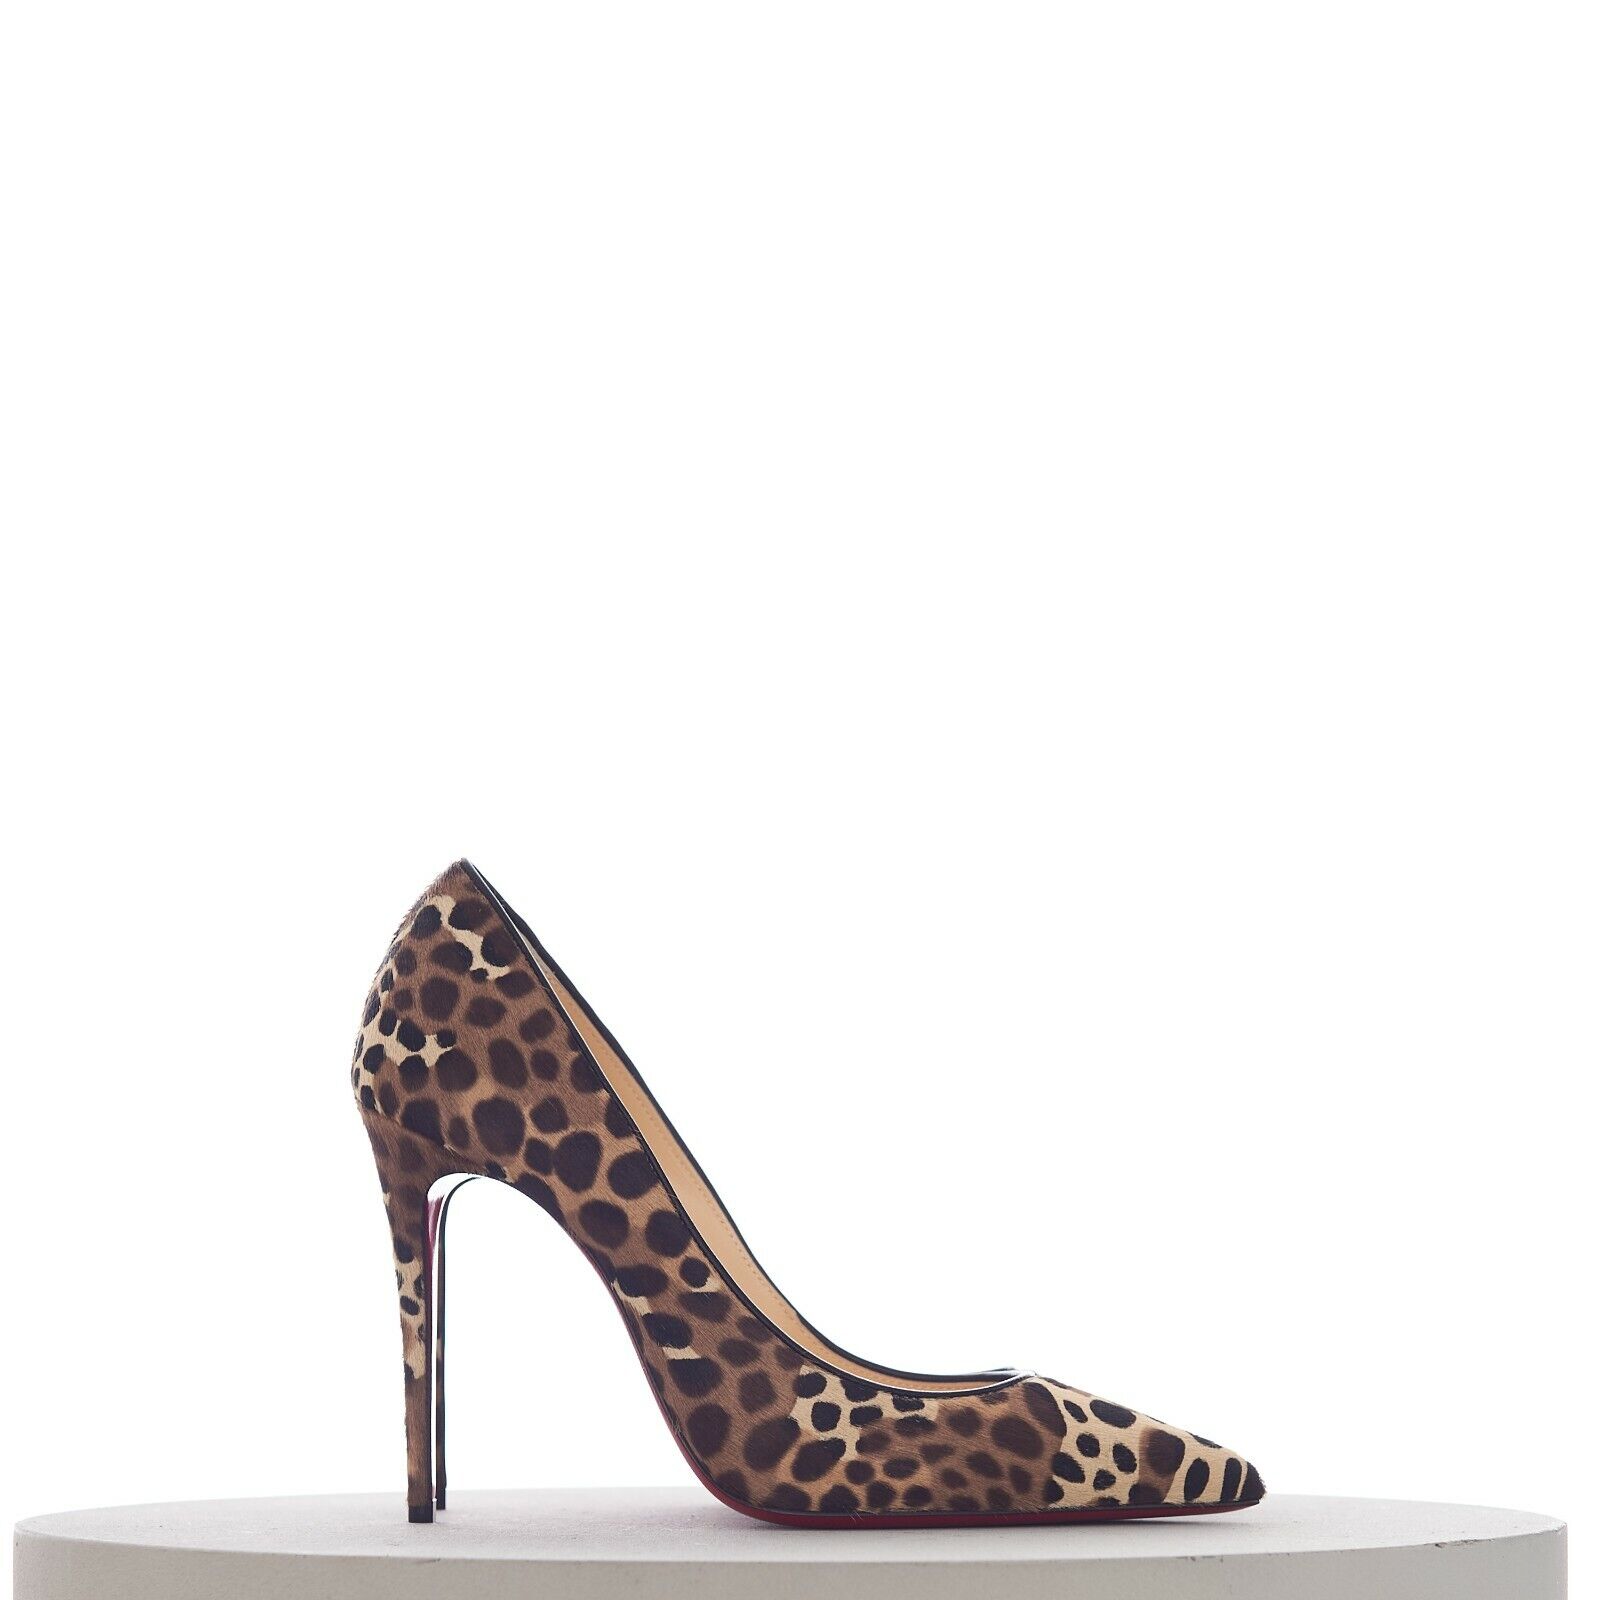 CHRISTIAN LOUBOUTIN 895$ Kate 100mm Pumps In Leopard Print Pony Leather |  eBay